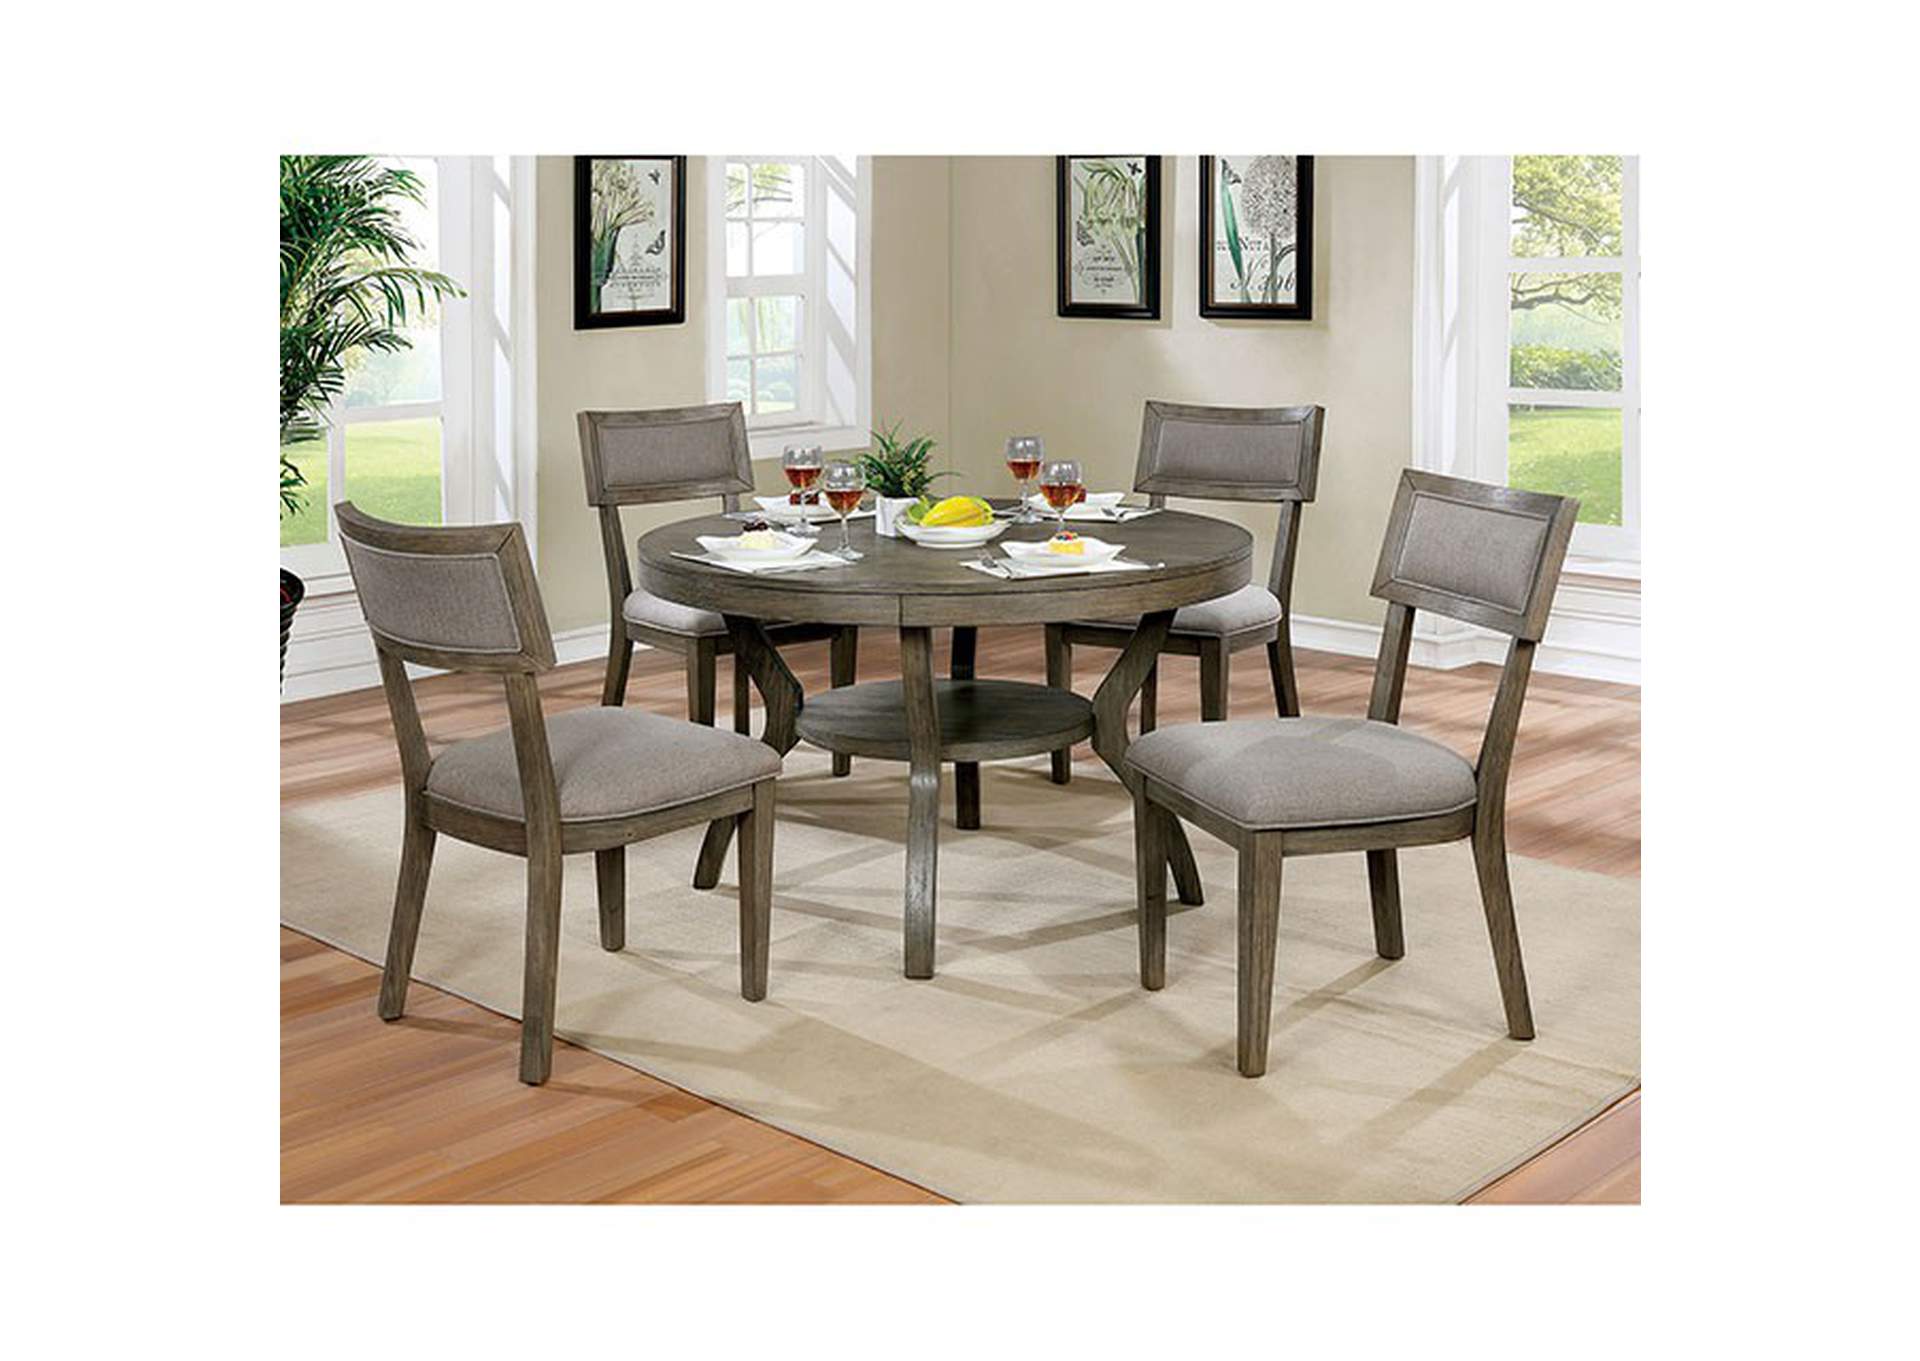 Leeds Round Dining Table,Furniture of America